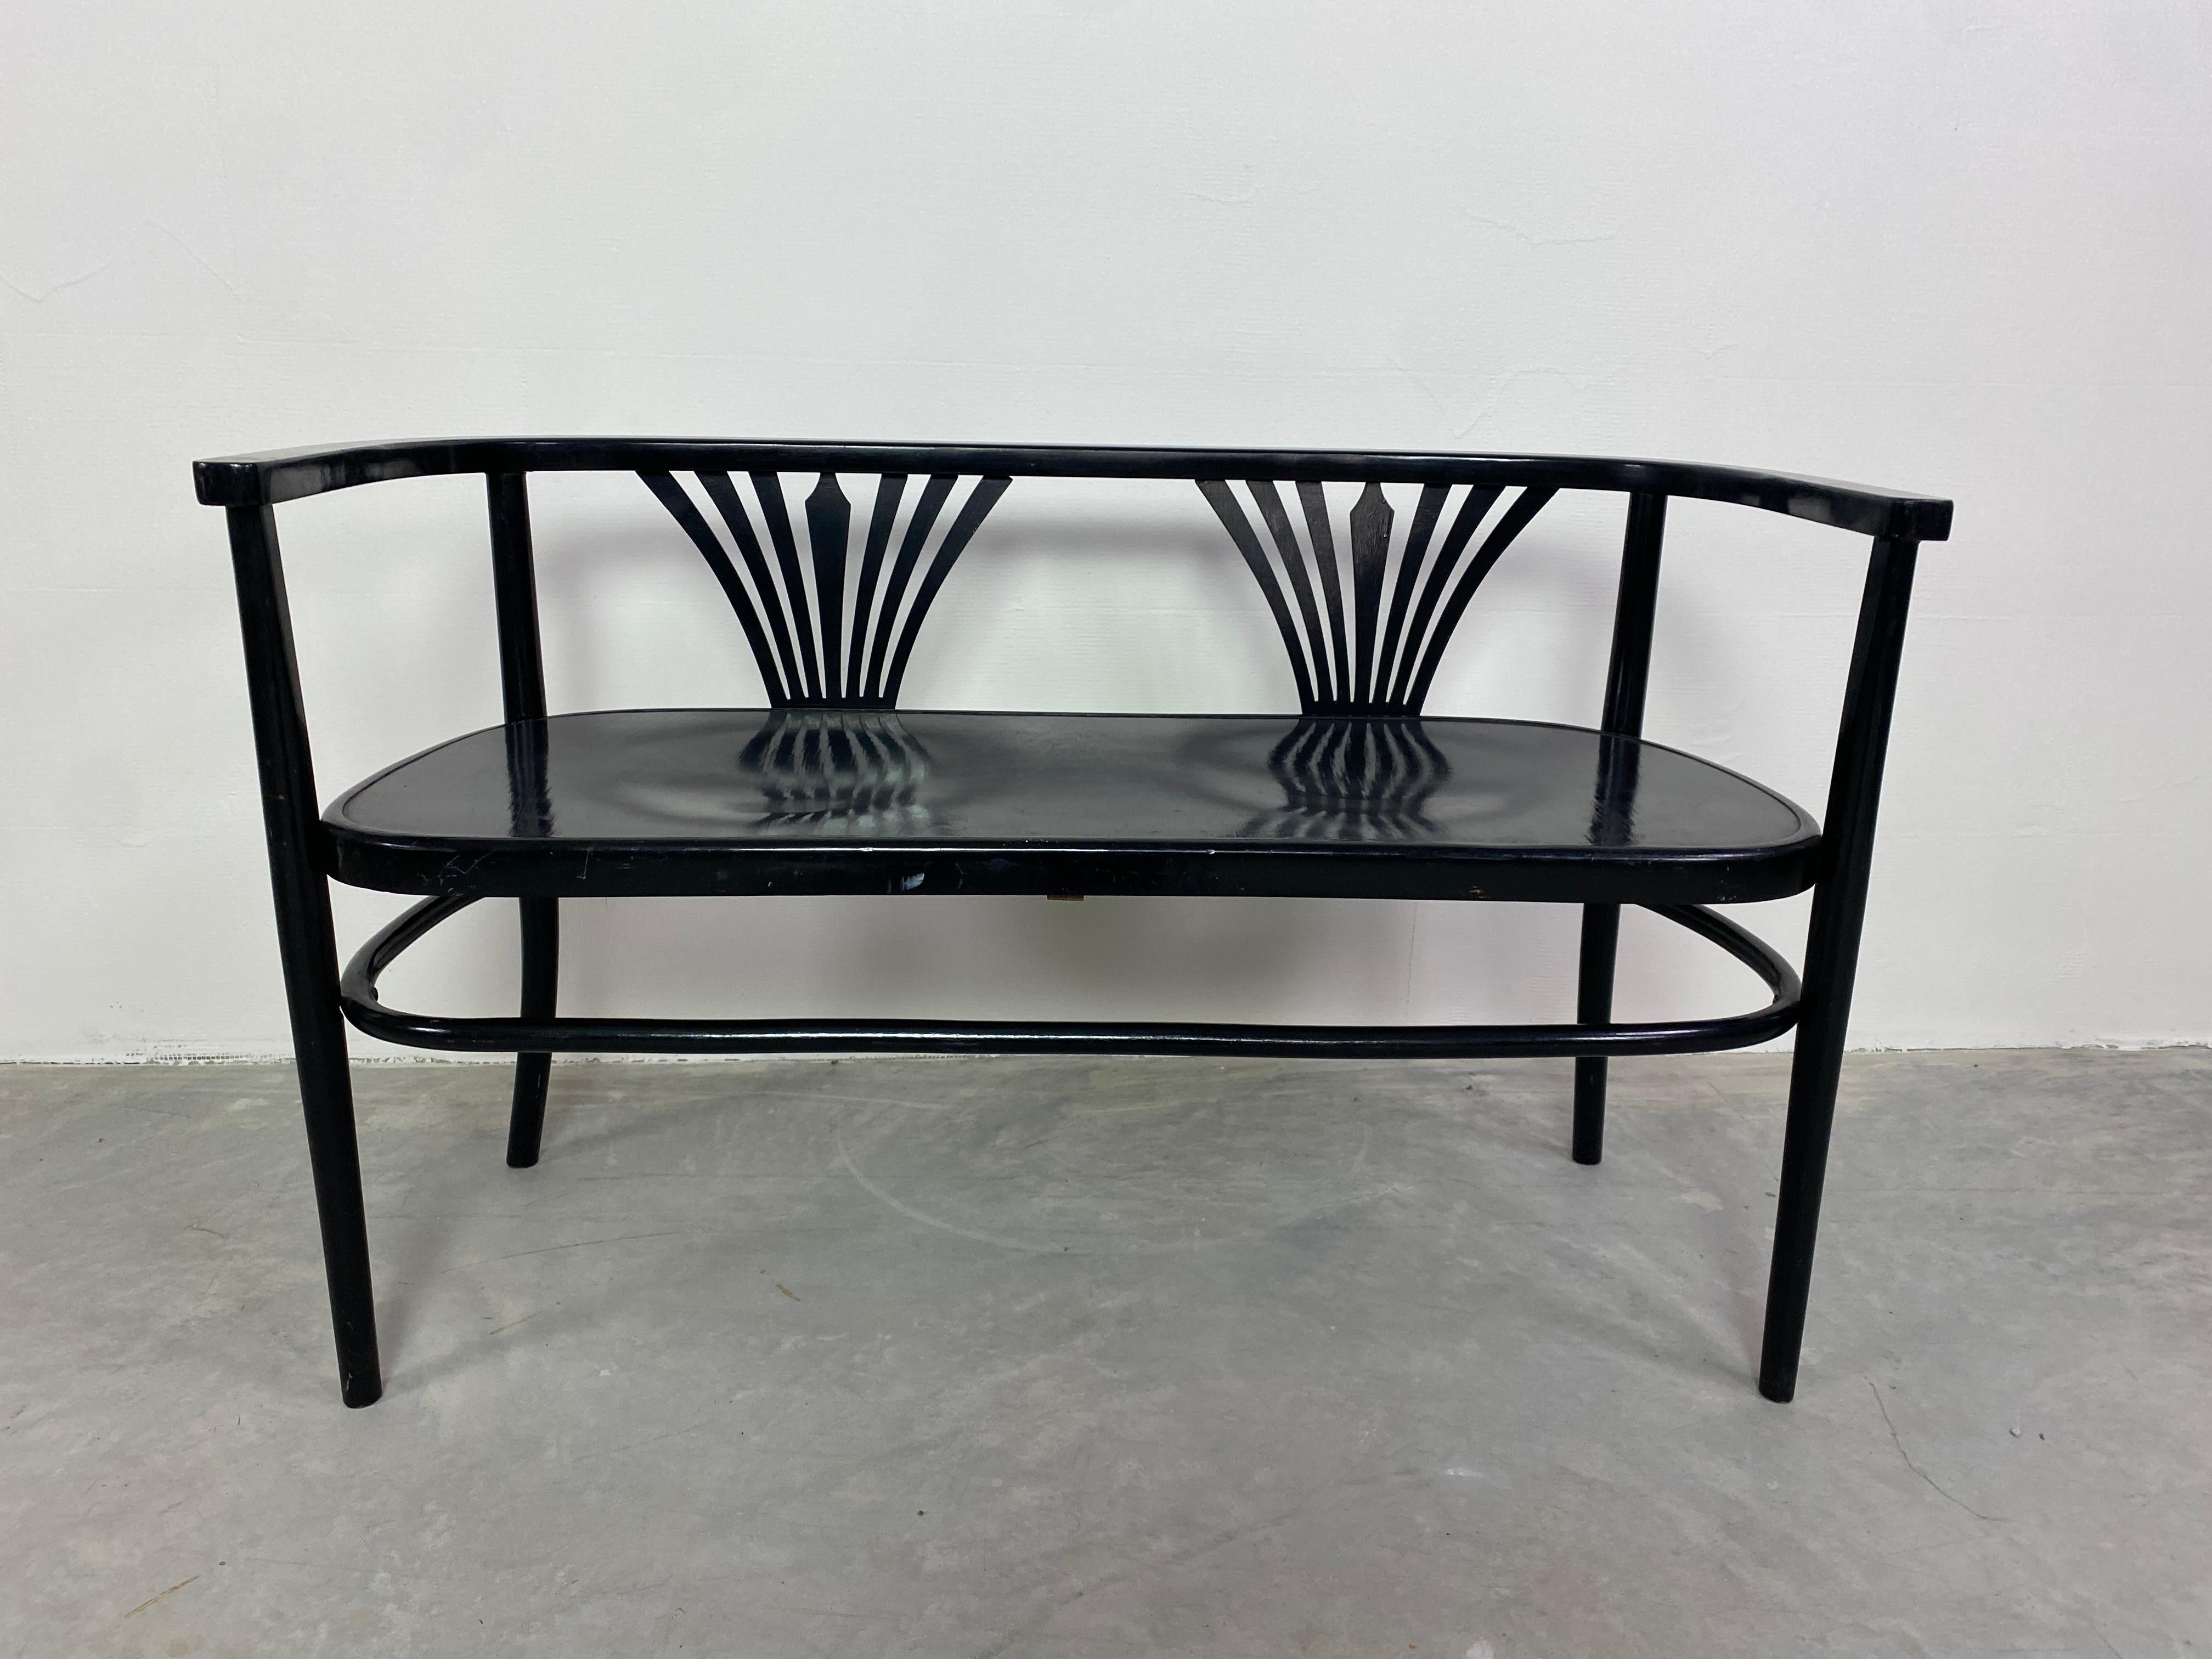 Black secession seating group by Fischel in original vintage condition with signs of use.
